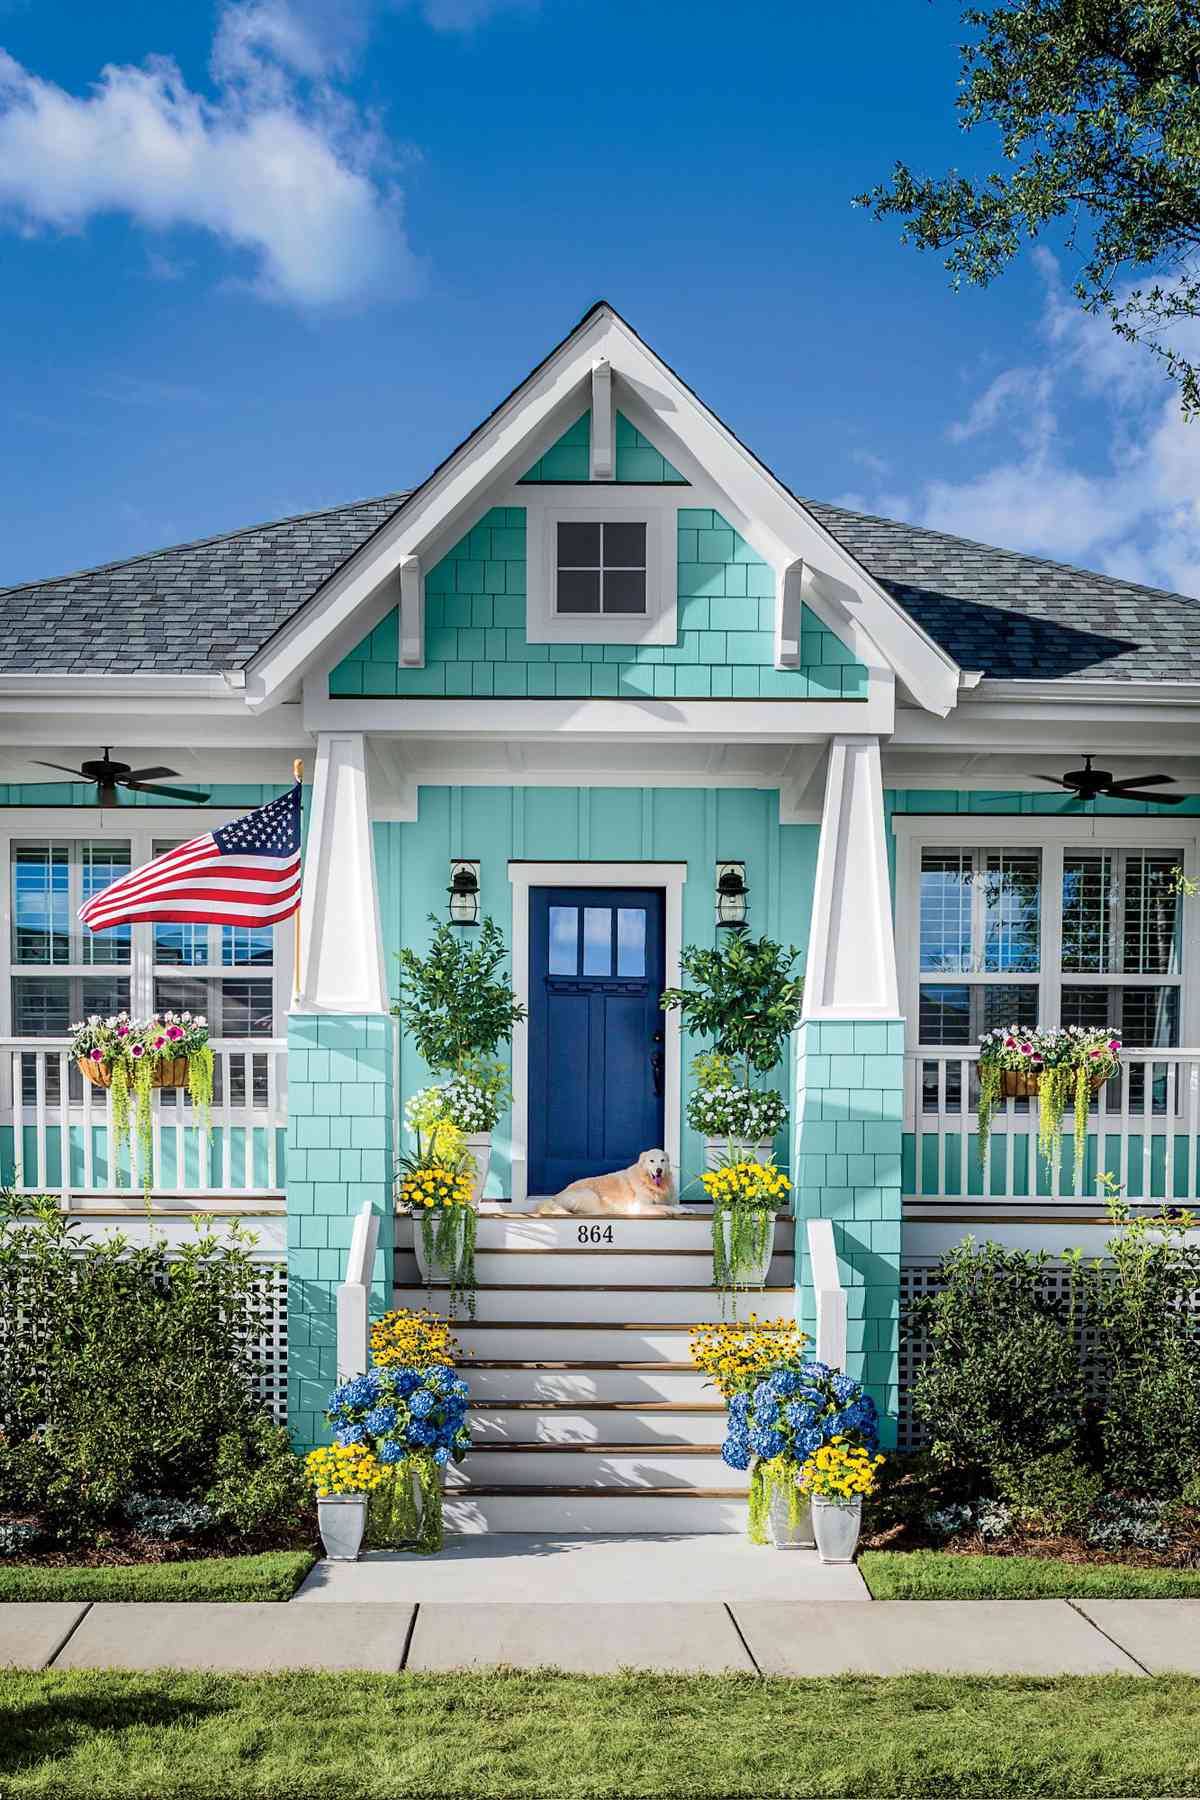 How To Pick The Right Exterior Paint Colors